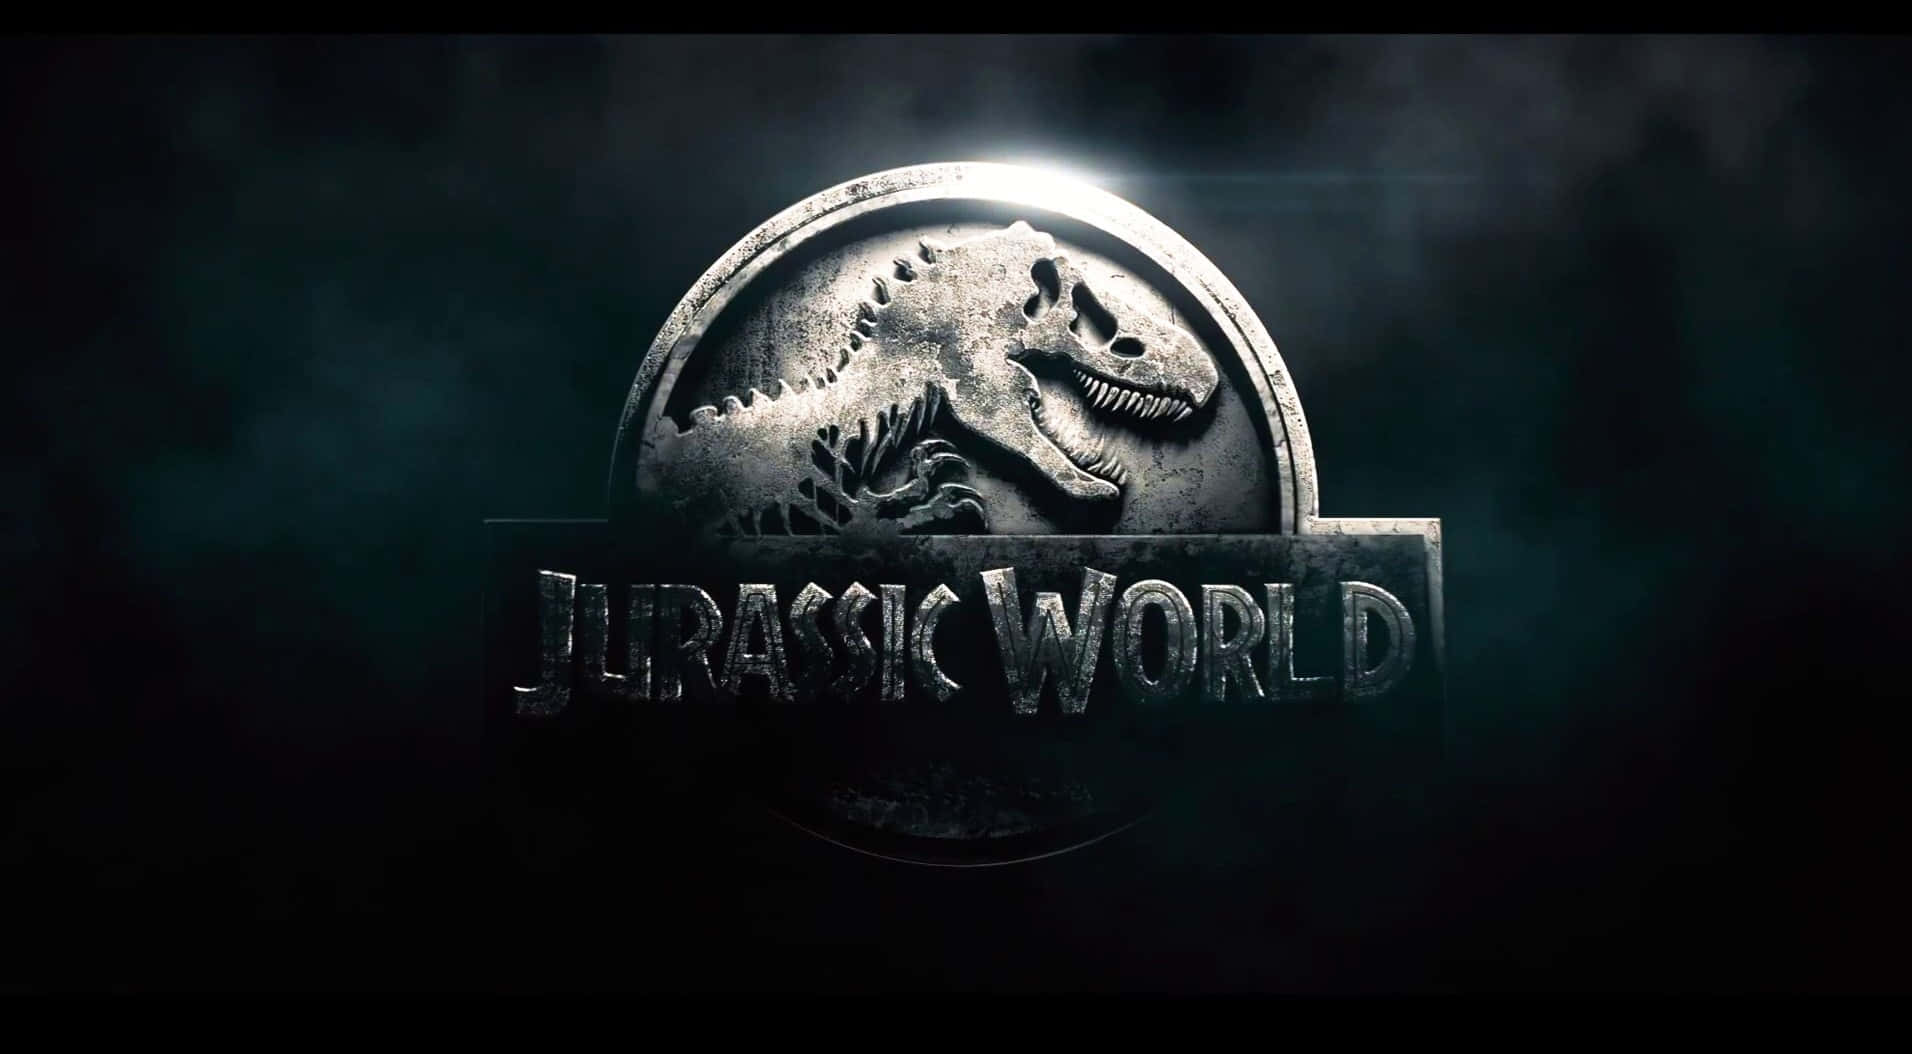 "Explore the exotic and thrilling world of Jurassic World"